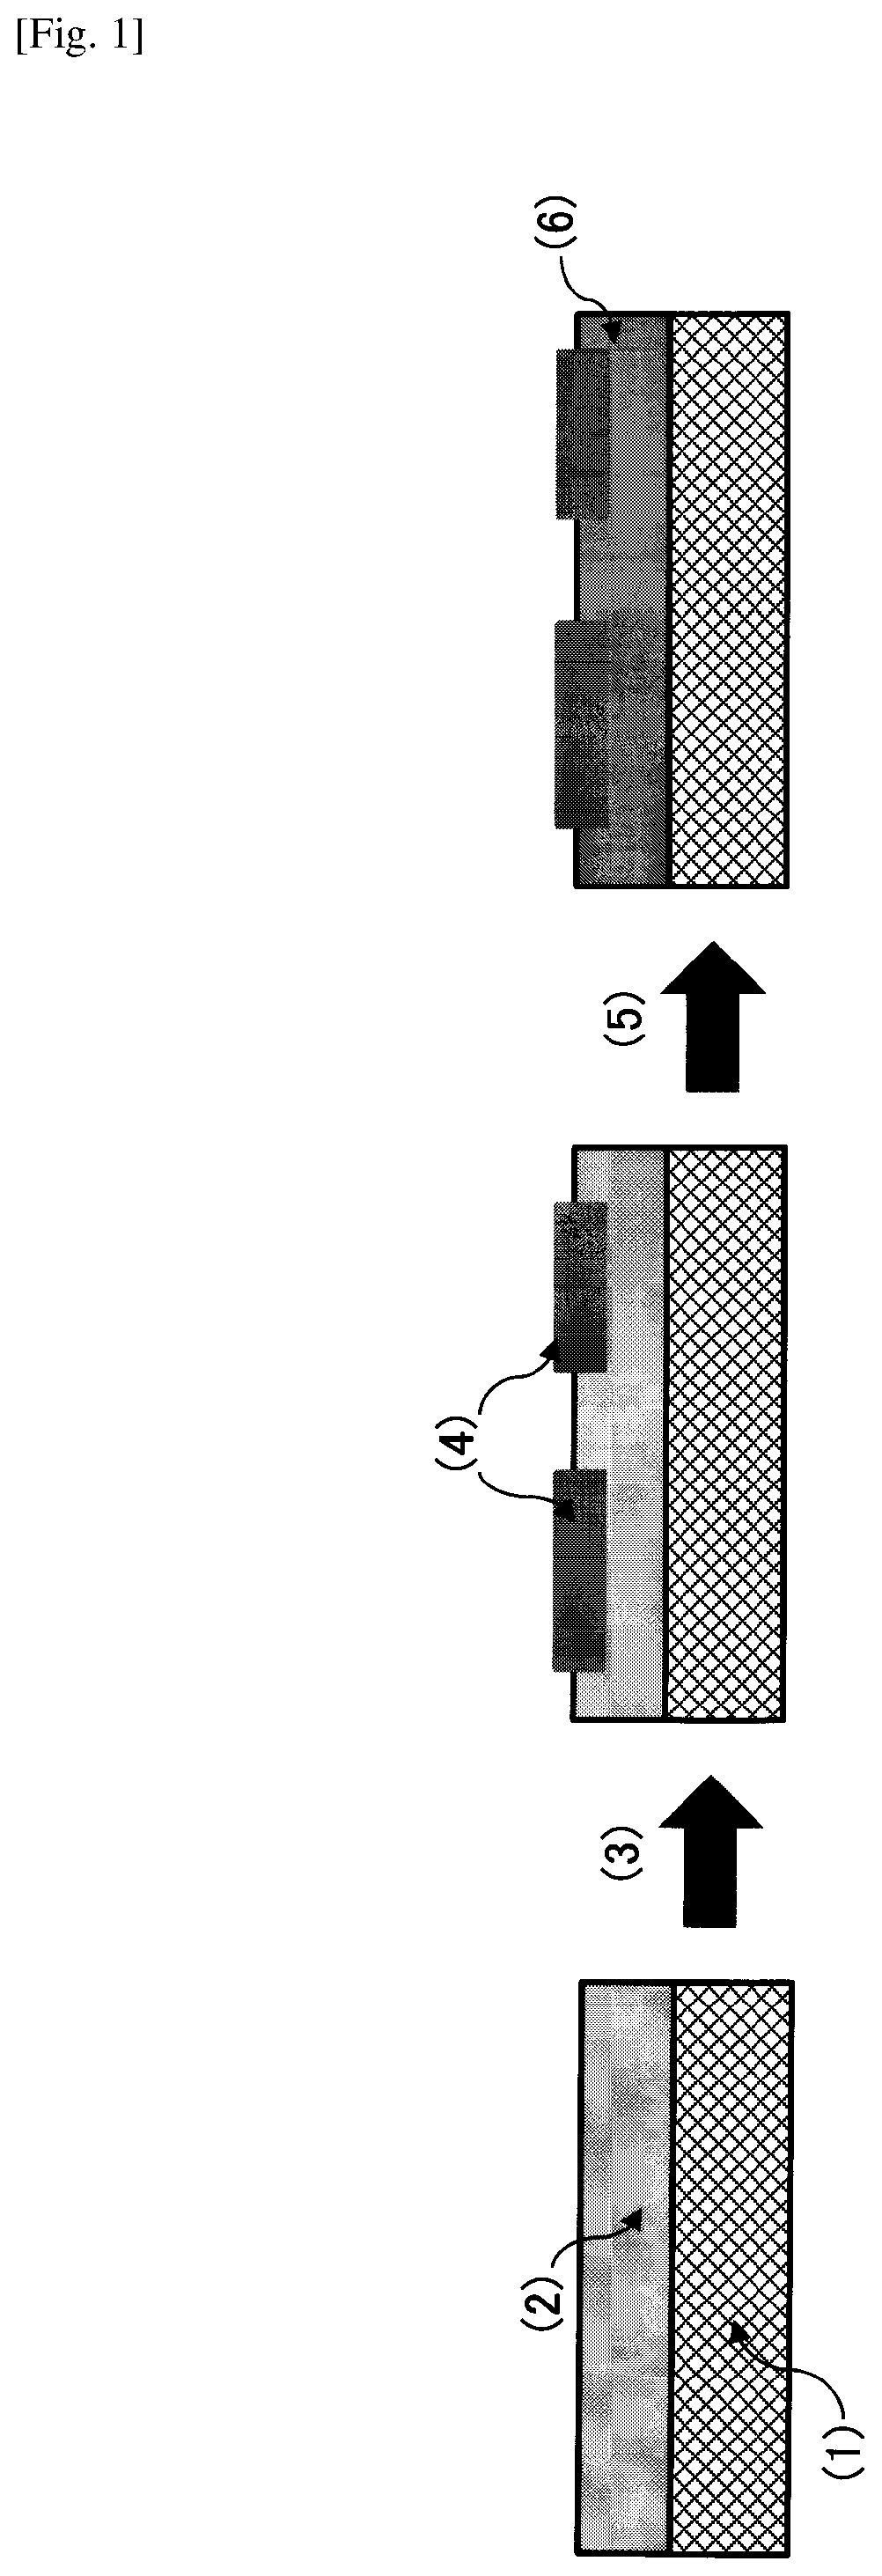 Printed substrate and method for printing onto a substrate